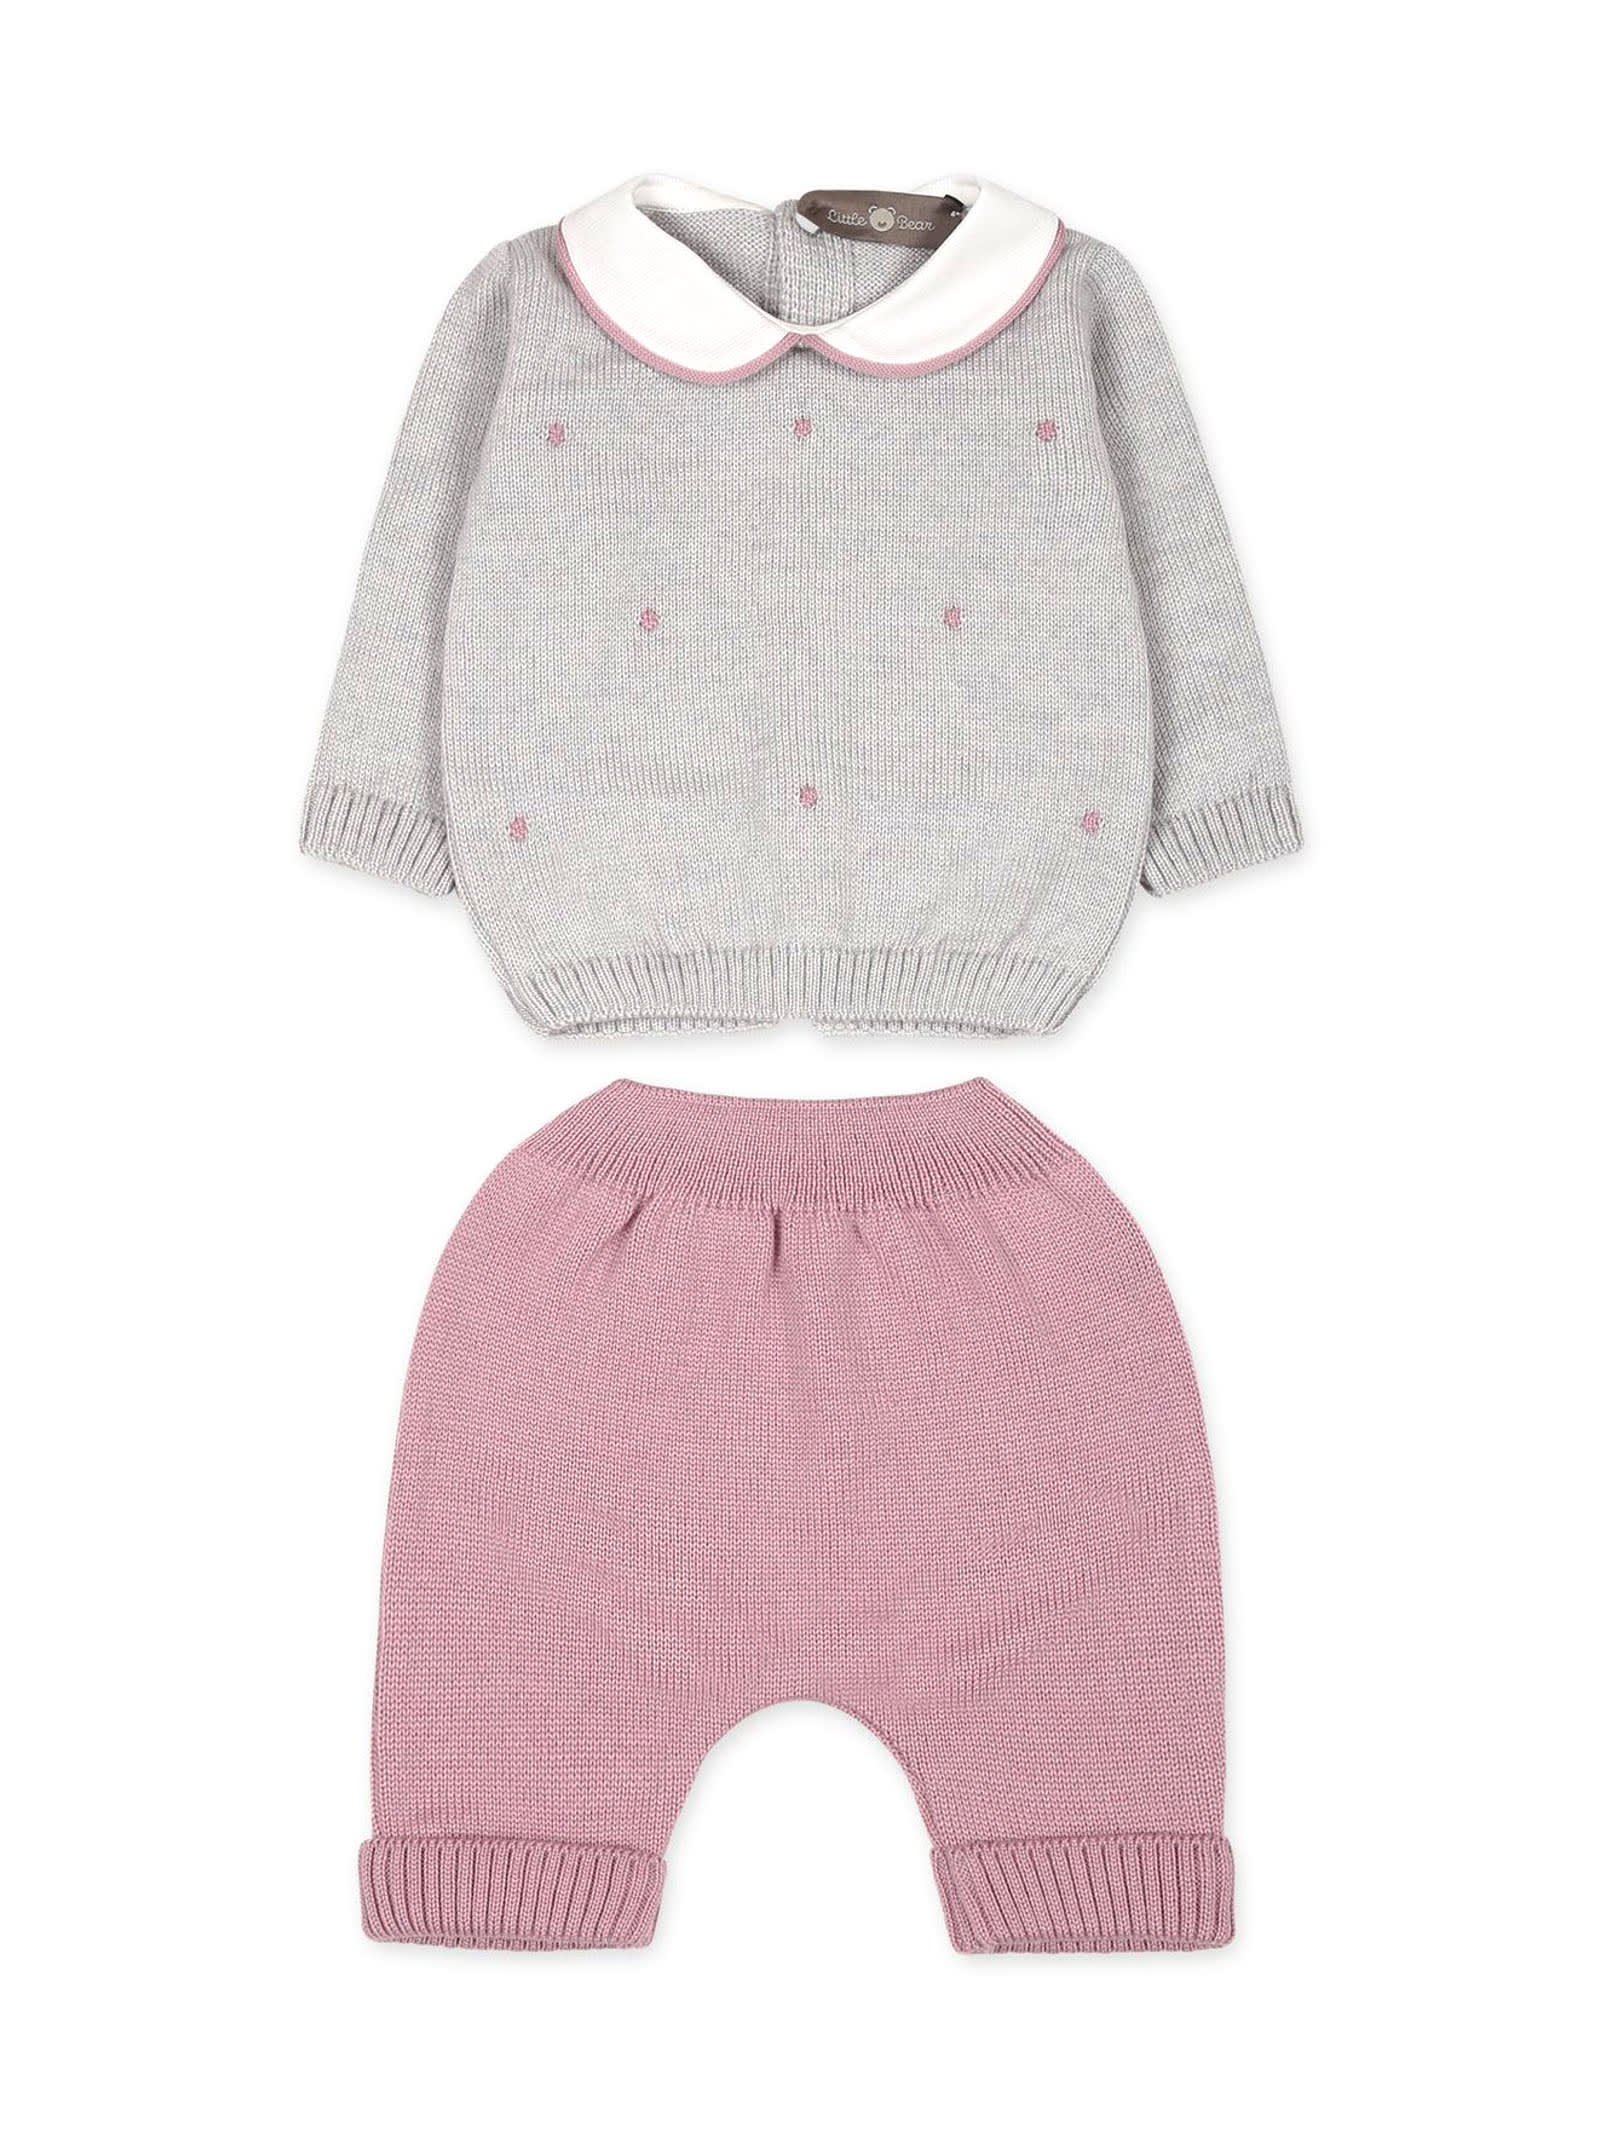 LITTLE BEAR GREY AND PINK VIRGIN WOOL SUIT